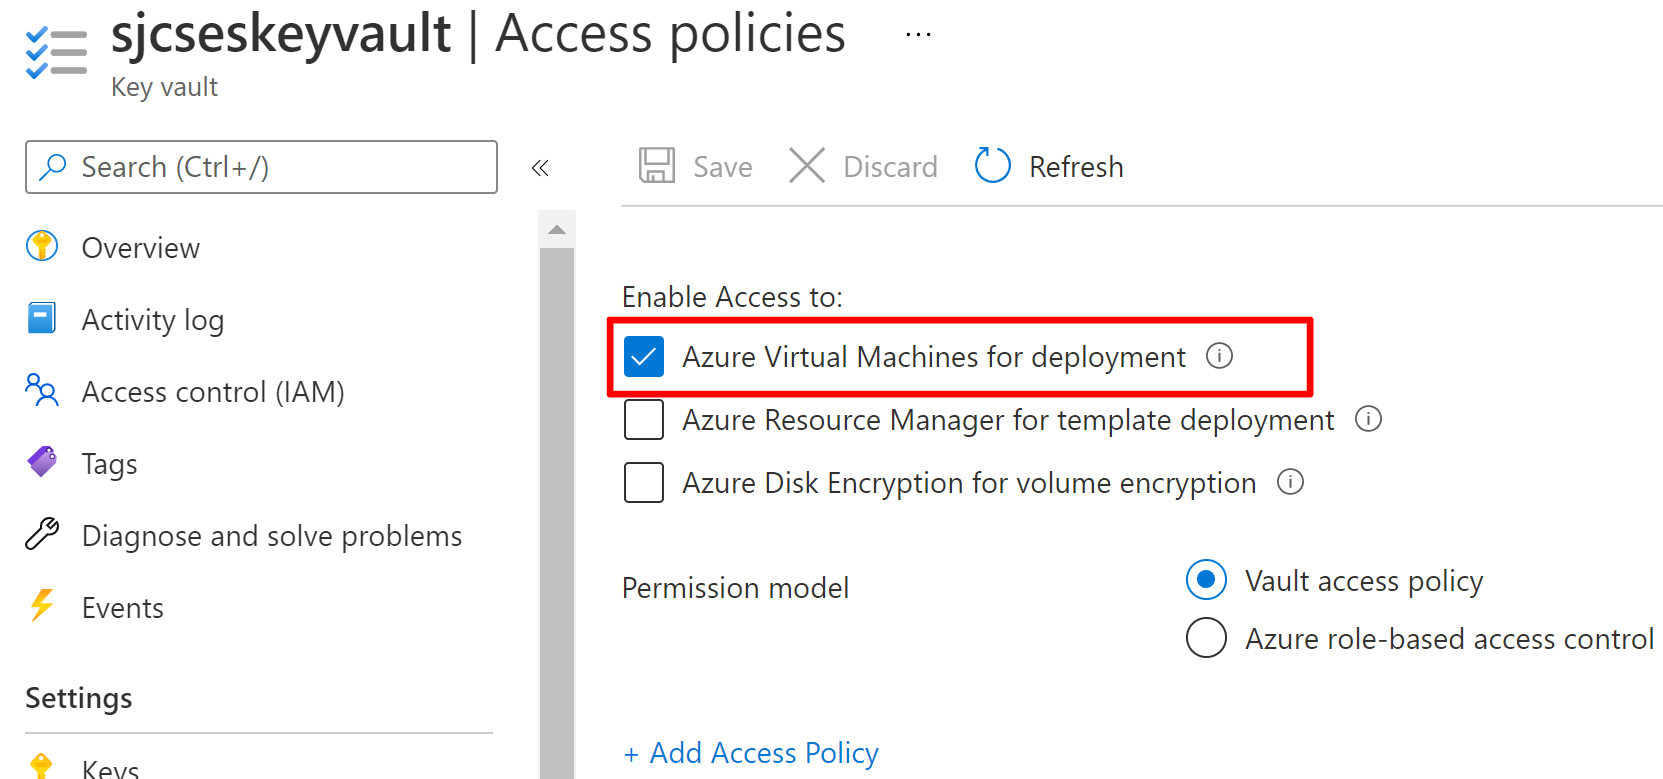 Image shows access policies window in the Azure portal.